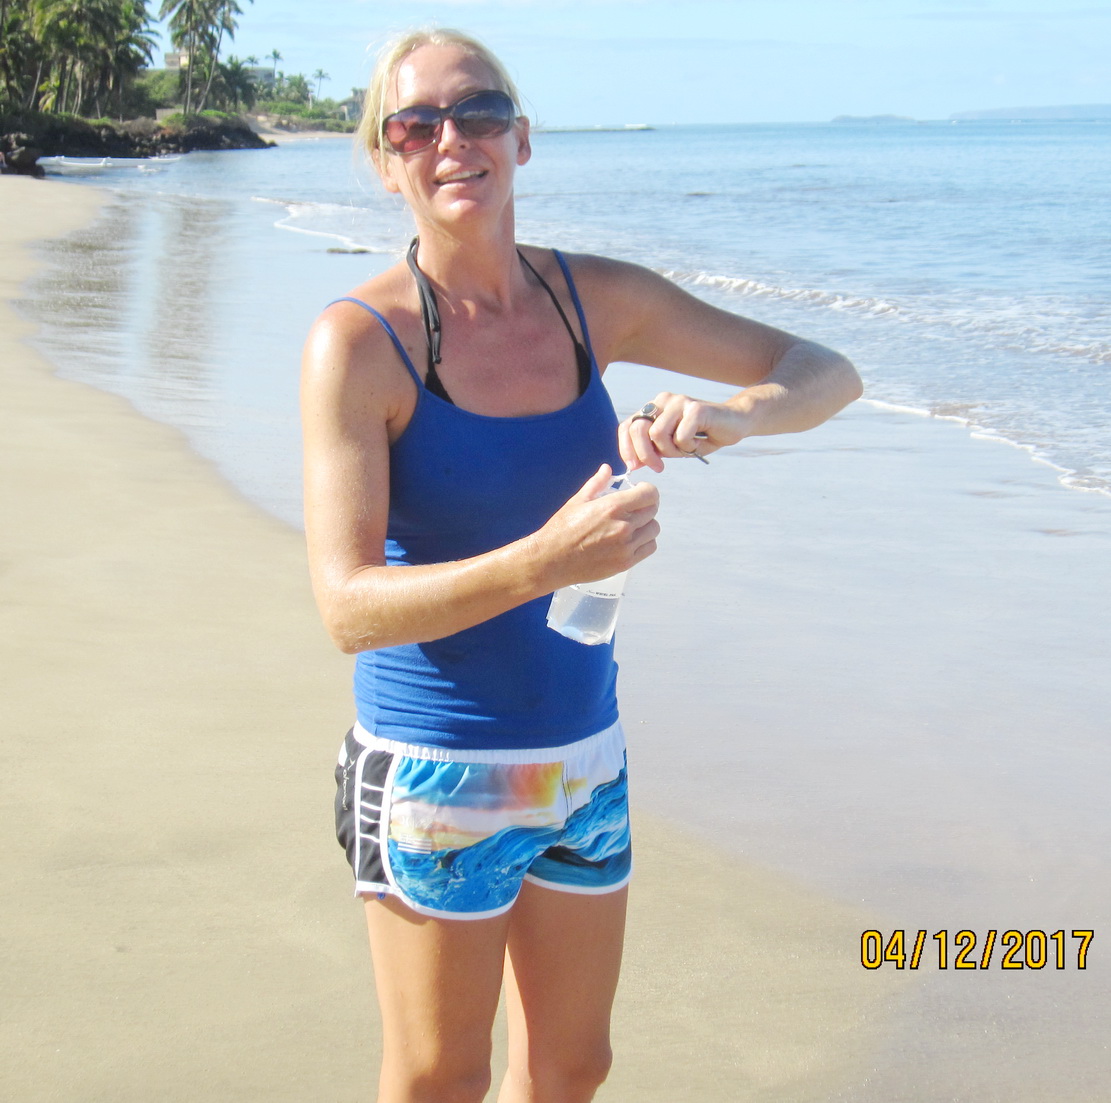 Who is that taking State DOH CWB marine water samples along Kihei Beaches??